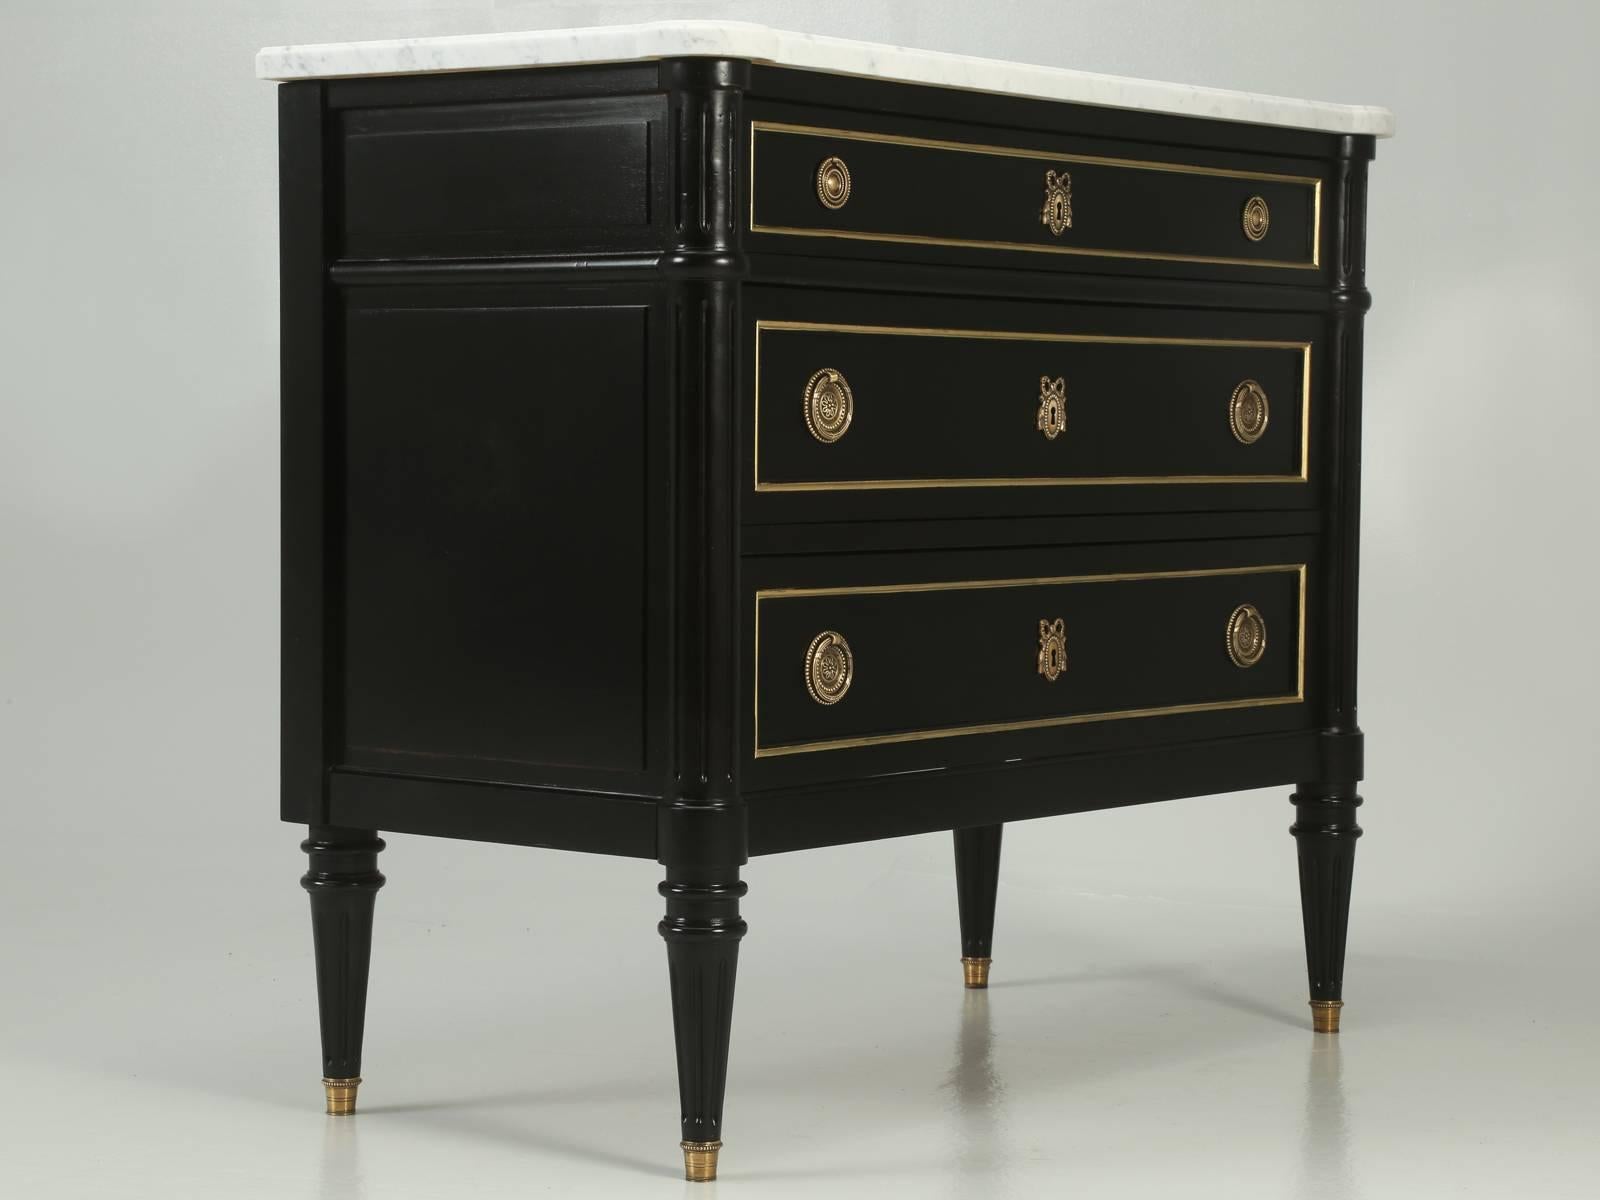 French Jansen inspired ebonized commode, or chest of drawers that was carefully restored by our Old Plank workshop. Although this French ebonized commode has the appearance of a 19th century piece, I believe it was probably made in the 1950s-1960s.